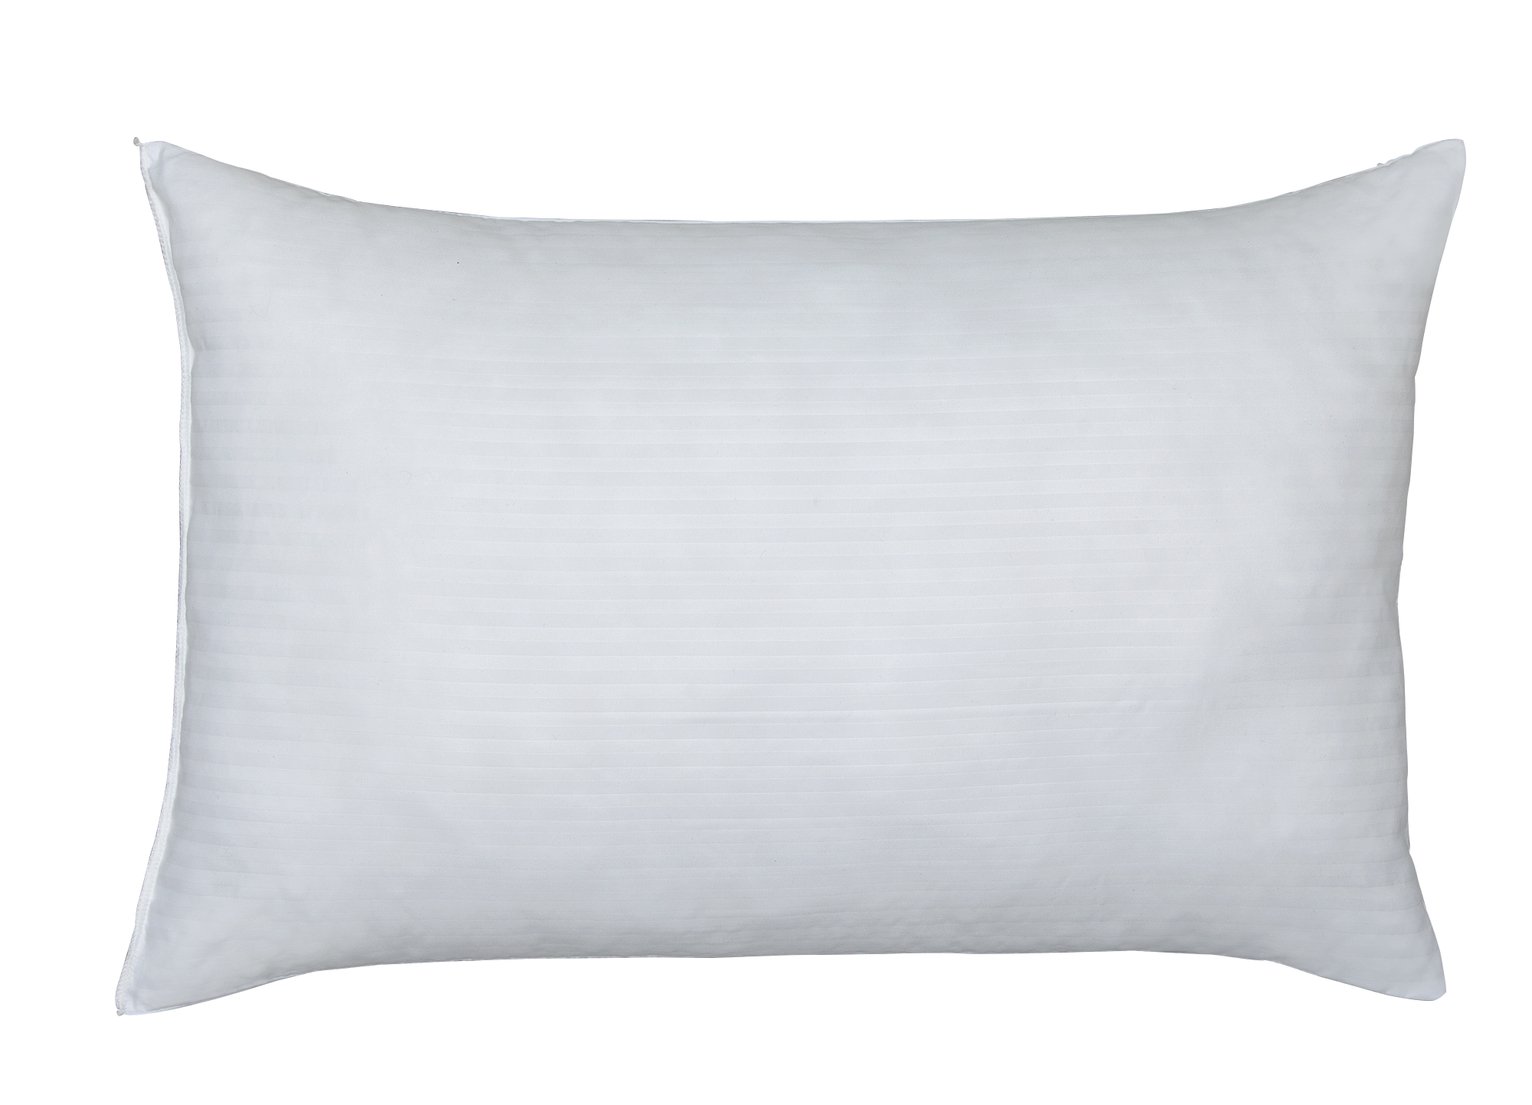 Argos Home Feels Like Down Pair of Pillows review